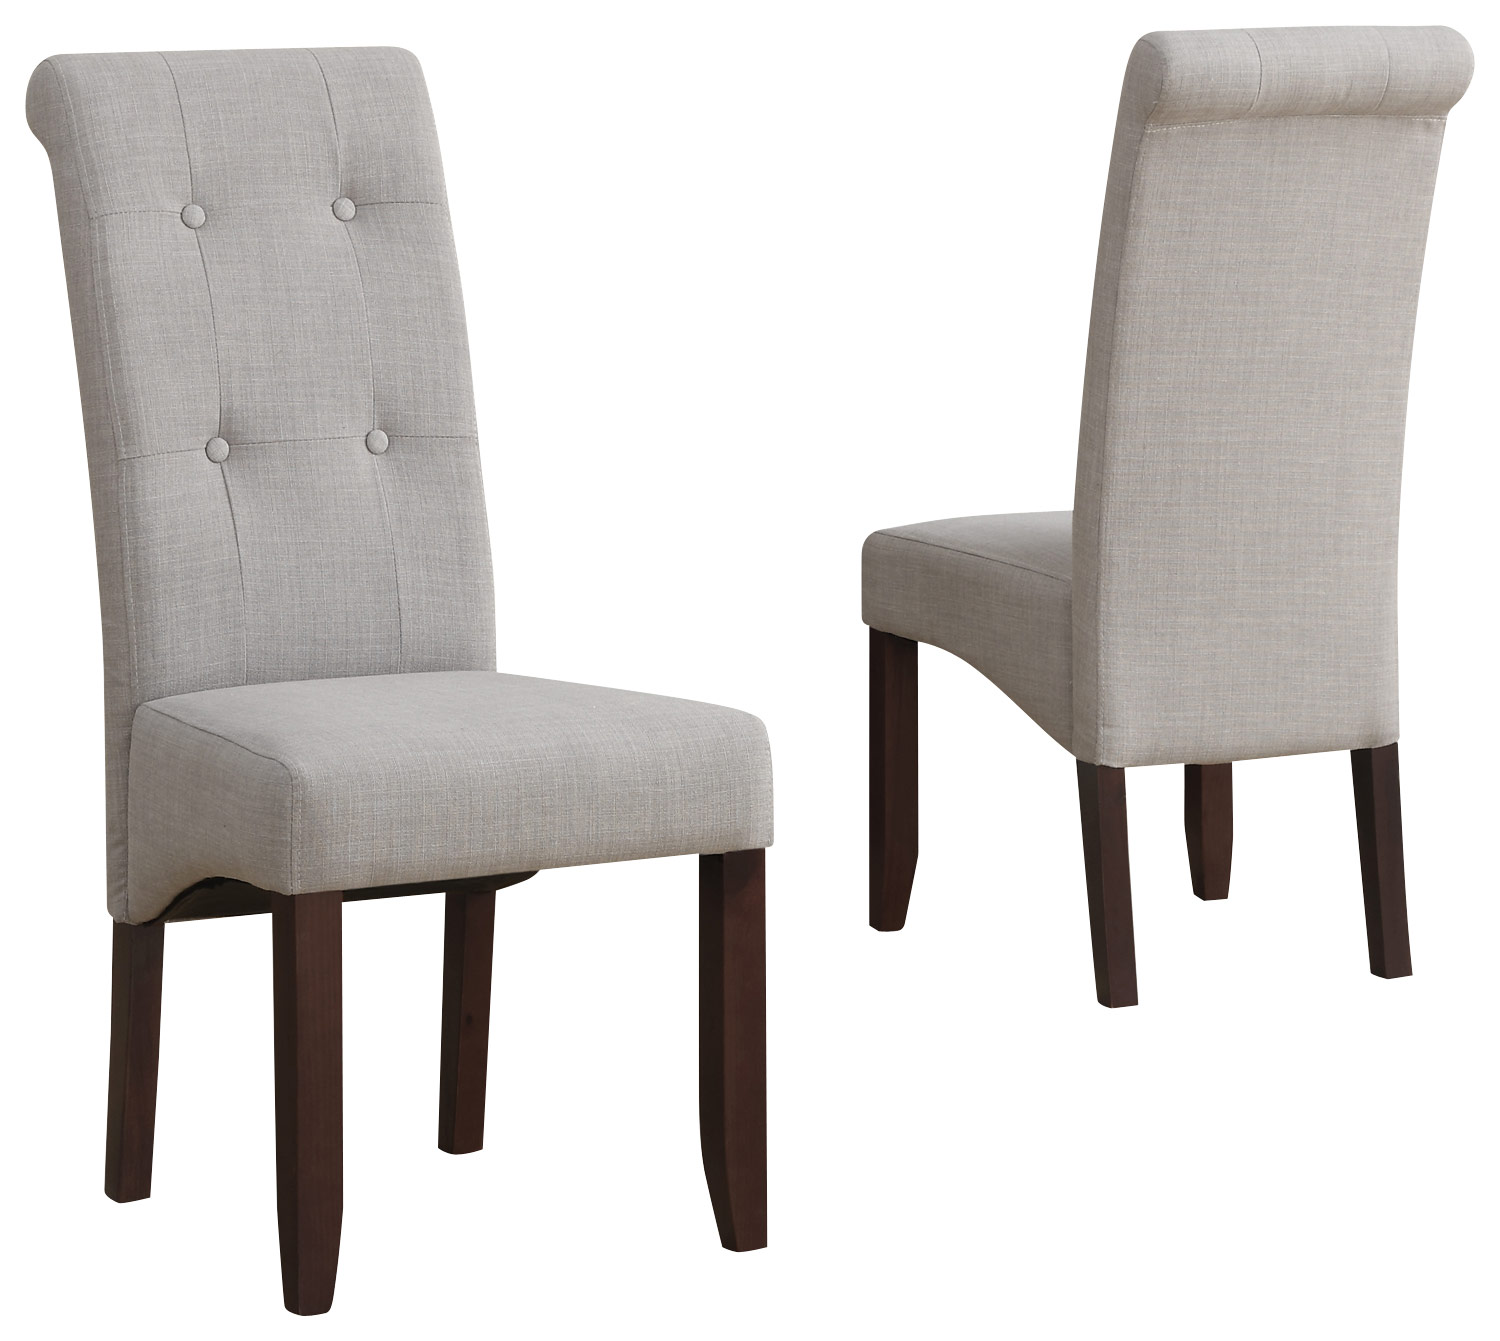 Simpli Home - Cosmopolitan Parson Chairs (Pair) - Dove Gray was $253.99 now $191.99 (24.0% off)